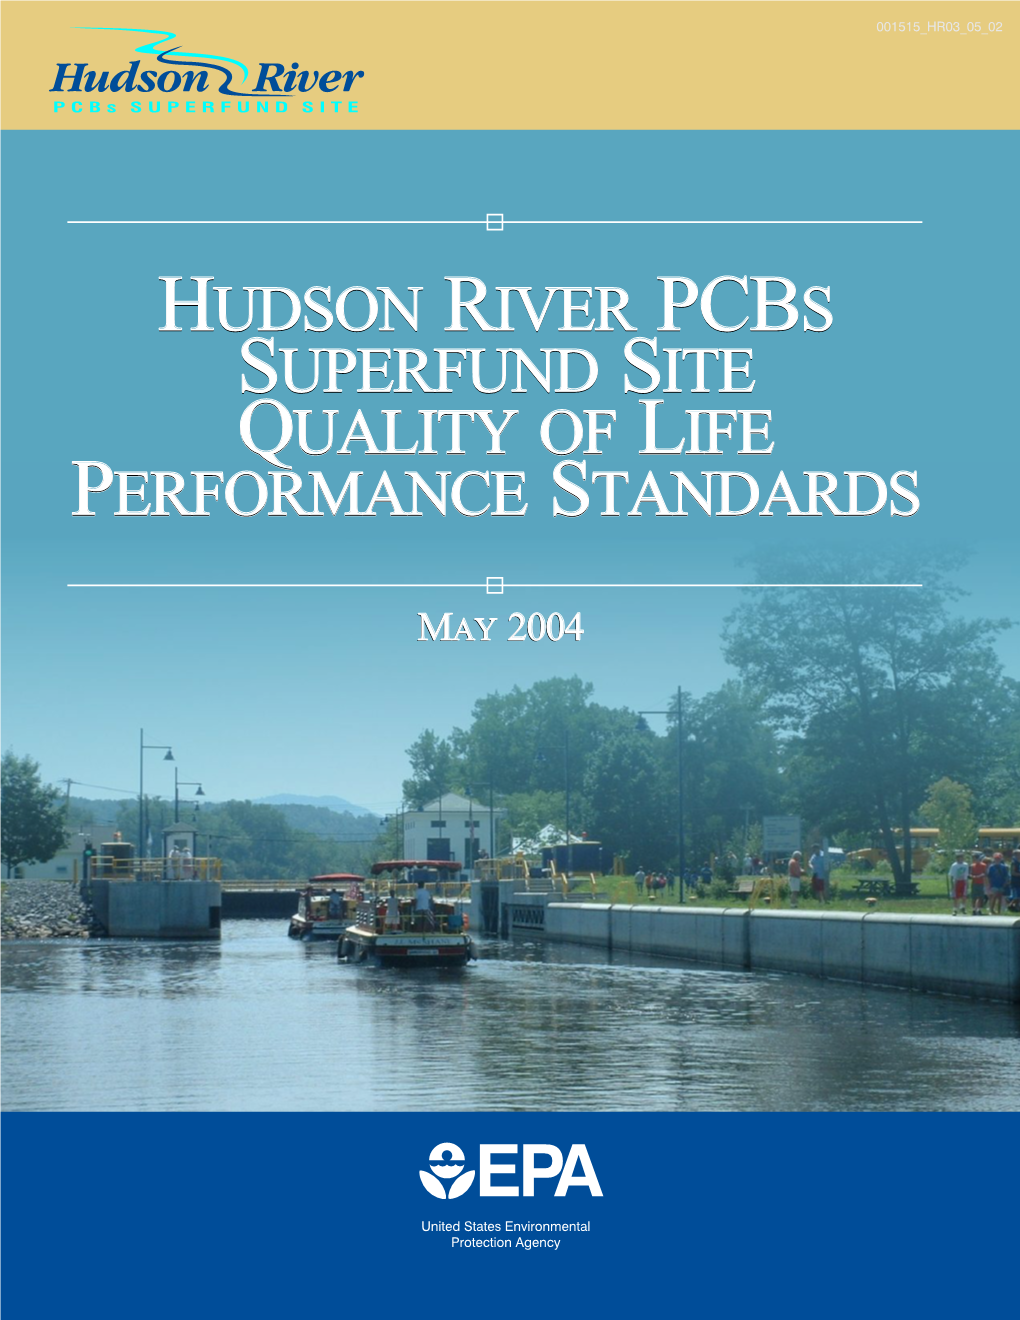 Hudson River Pcbs Superfund Site Quality of Life Performance Standards